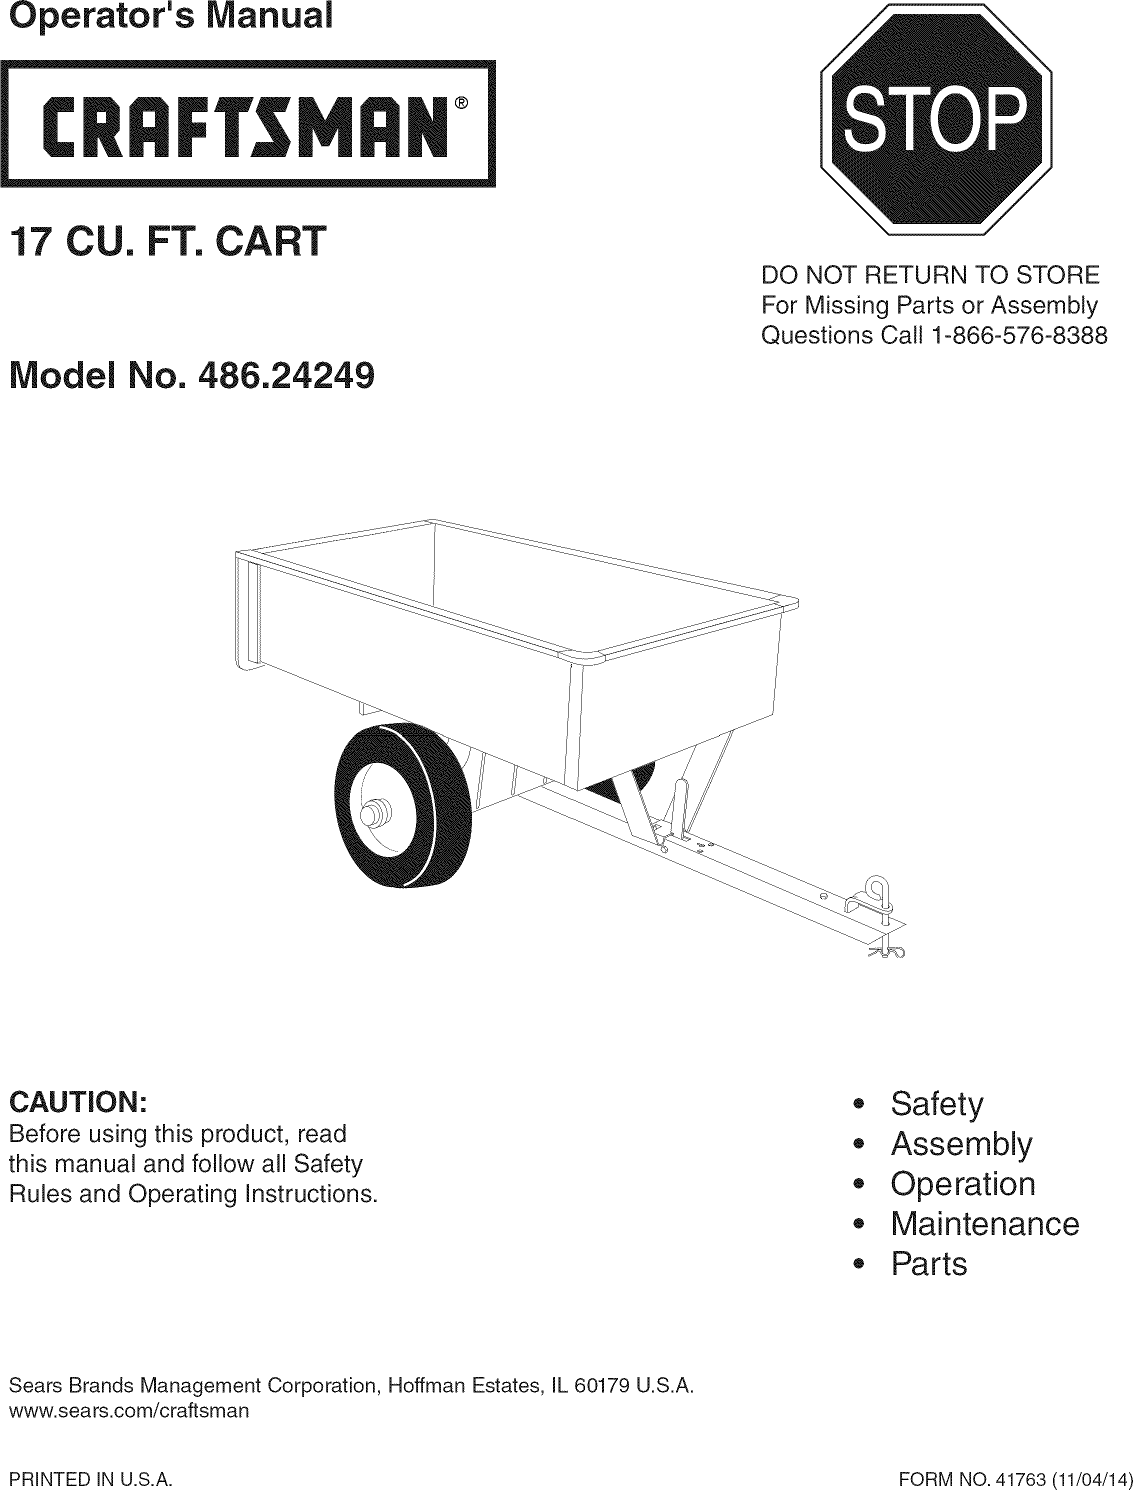 Page 1 of 12 - Craftsman 48624249 1411136L User Manual  CART - Manuals And Guides